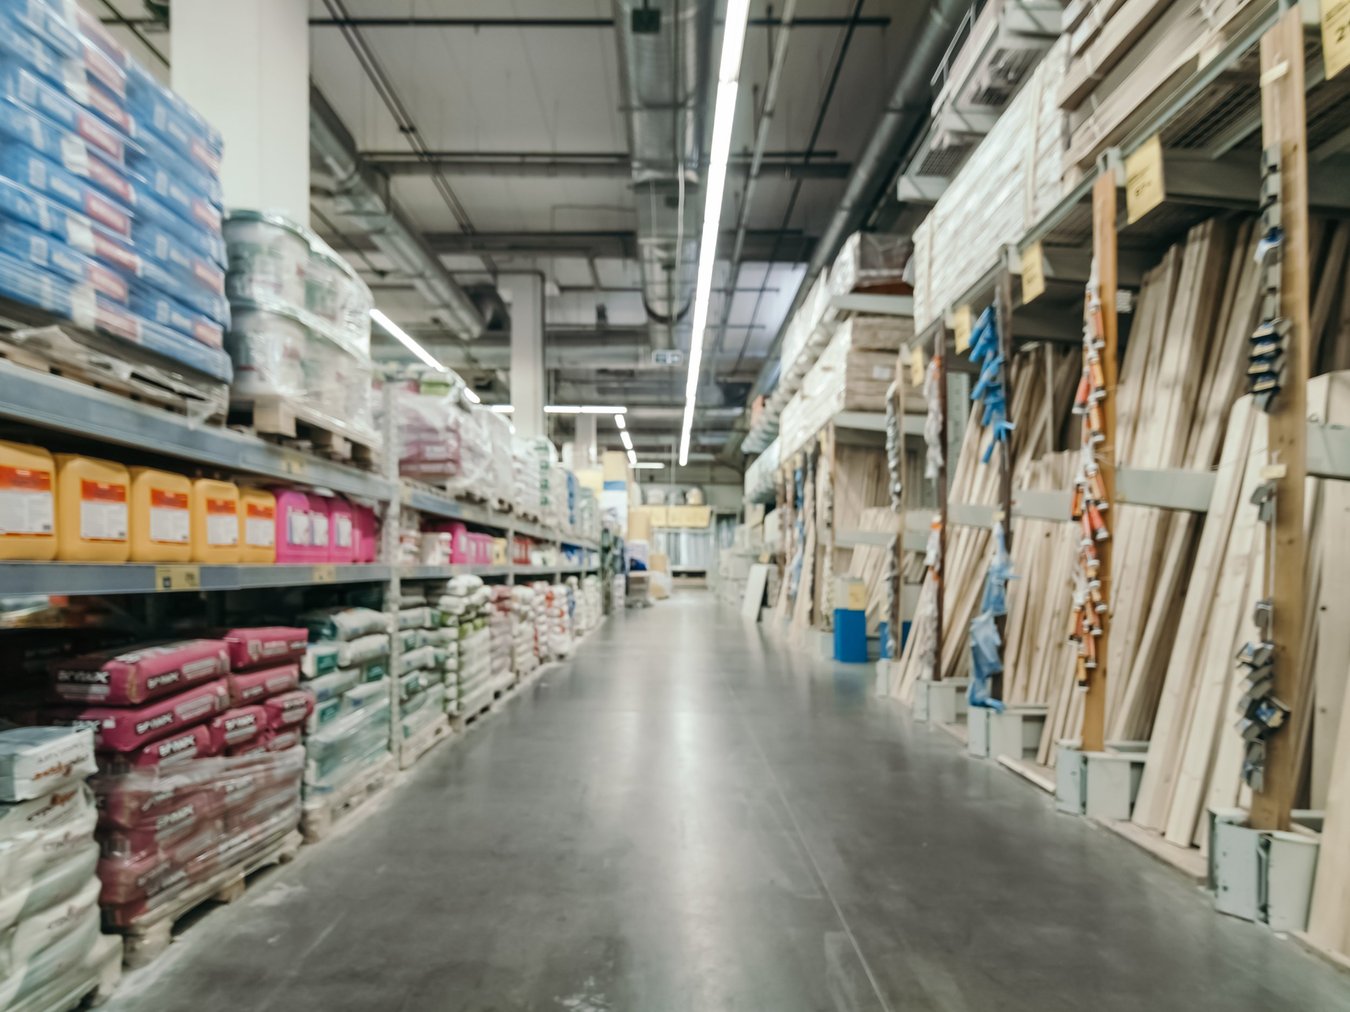 A warehouse aisle with home construction supplies.